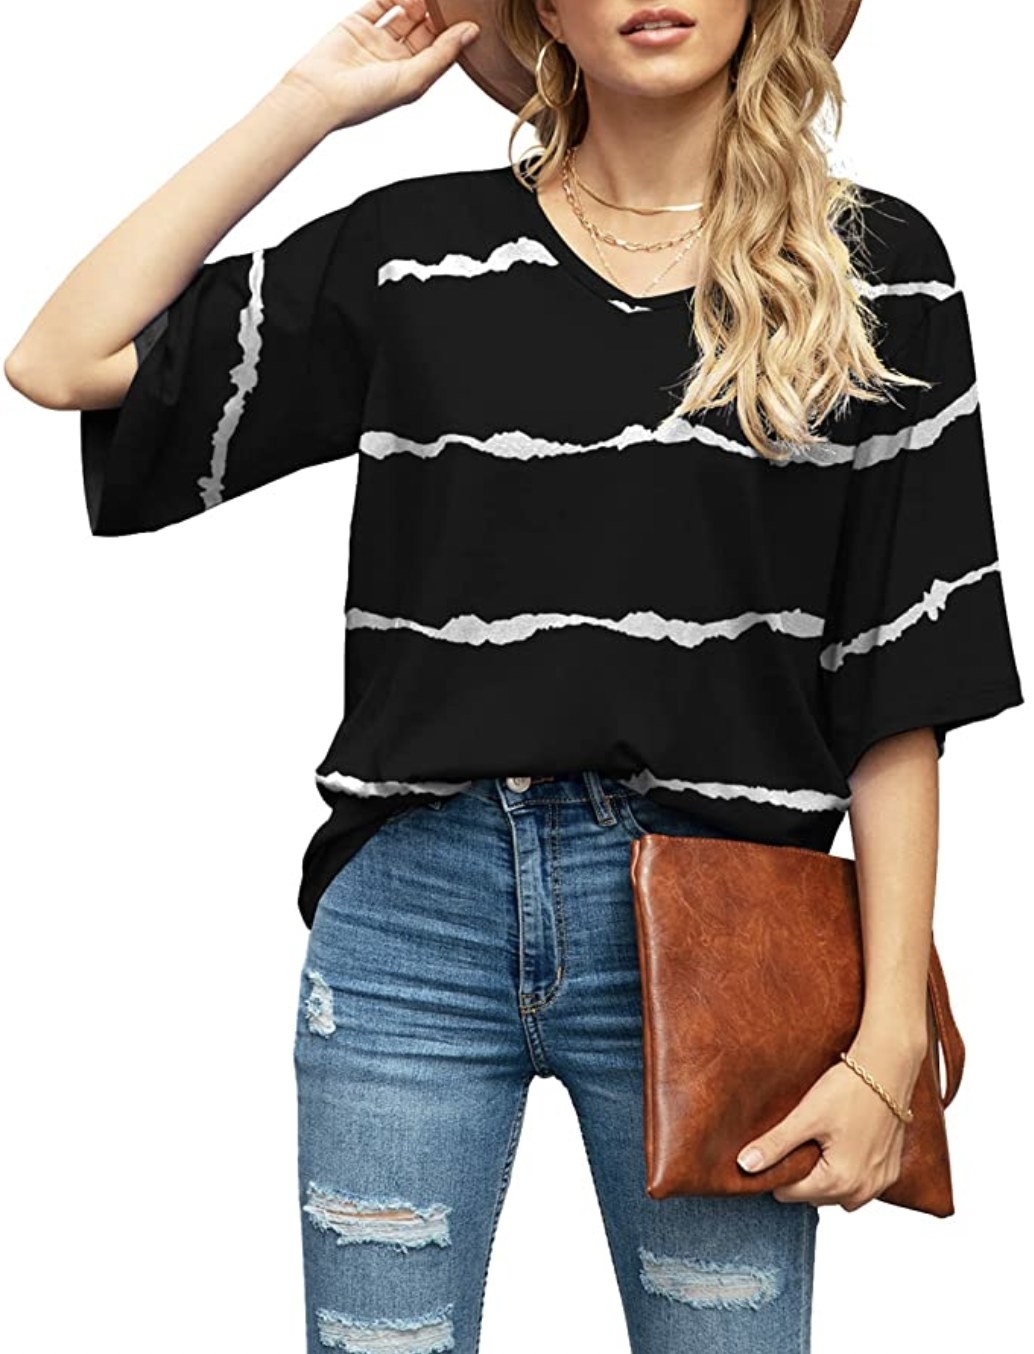 a person wearing the shirt in black with white stripes